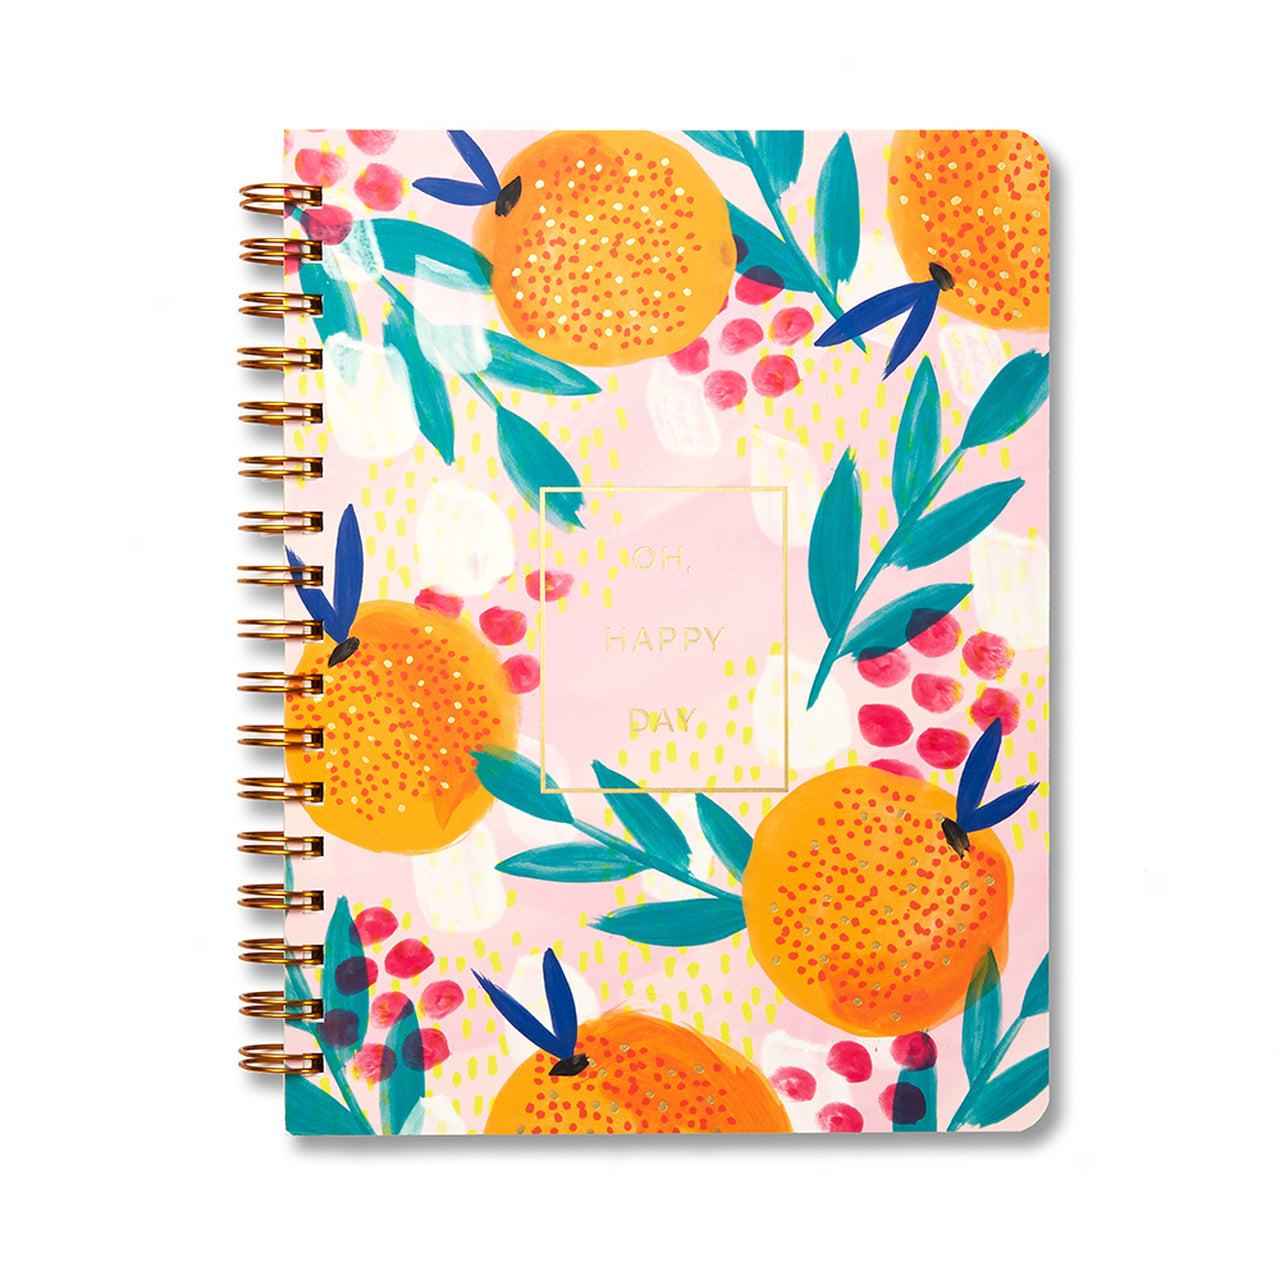 Oh Happy Day Notebook